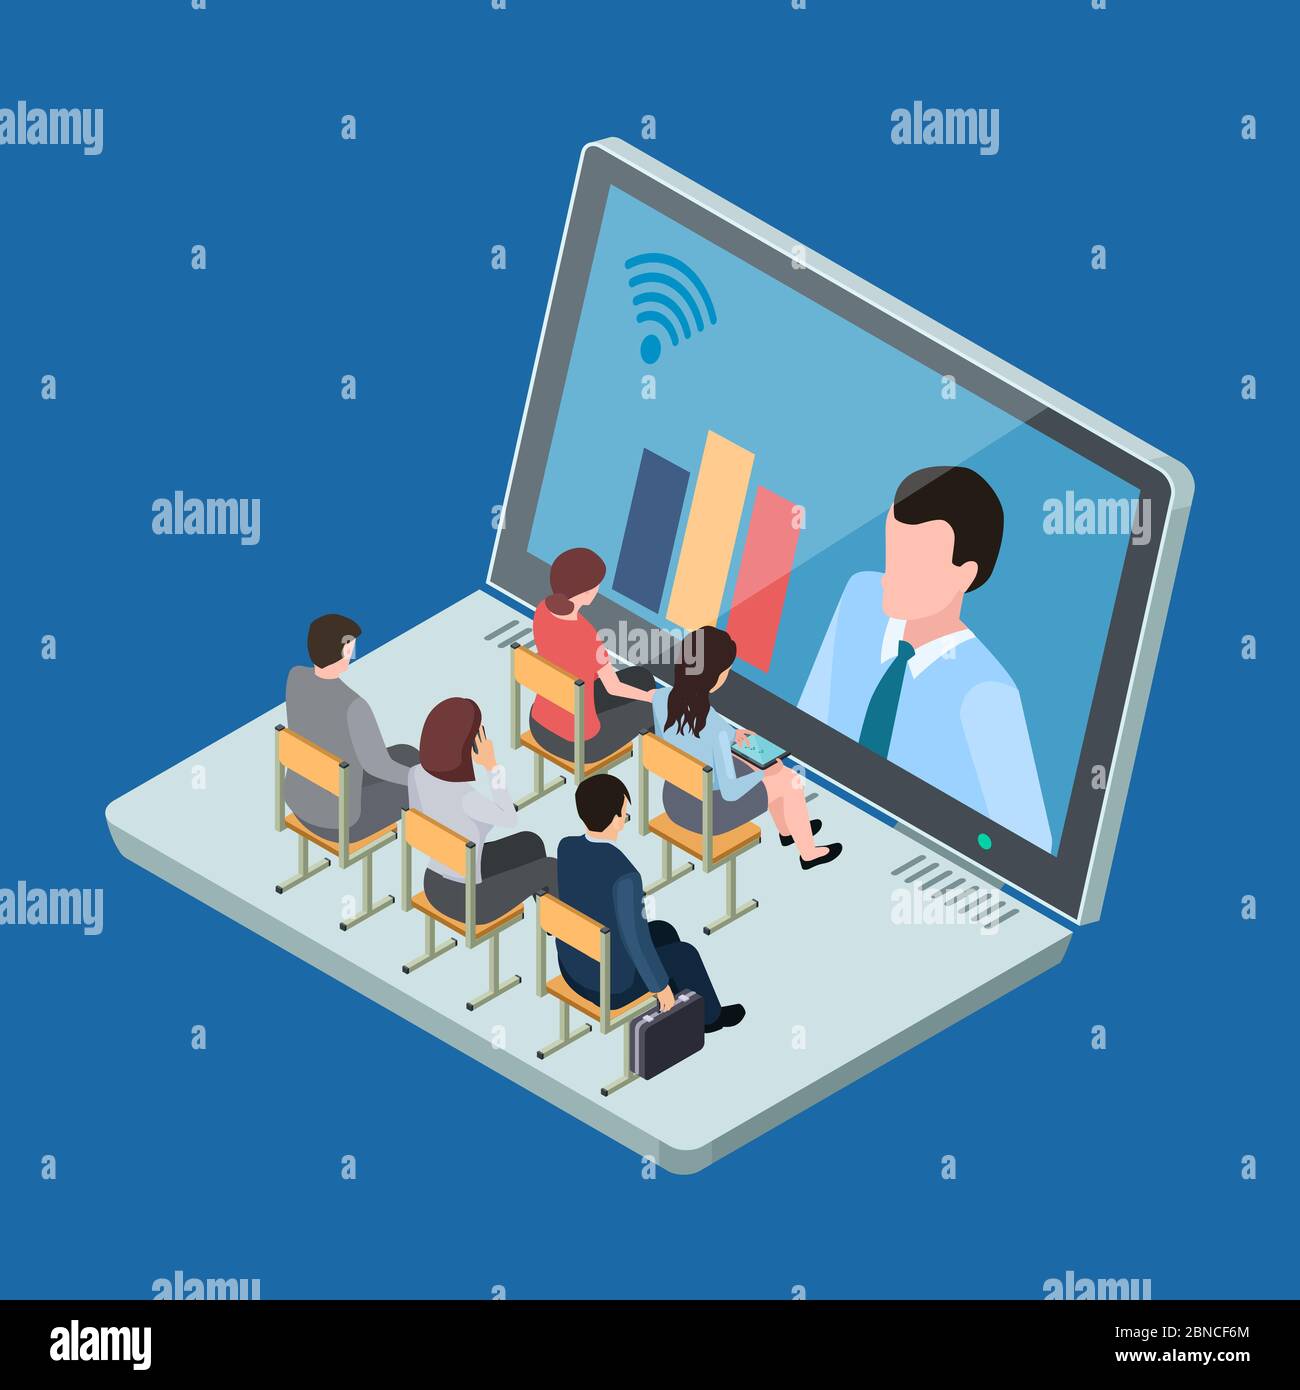 Online education or business training isometric vector concept. Education and training with technology, study learning illustration Stock Vector